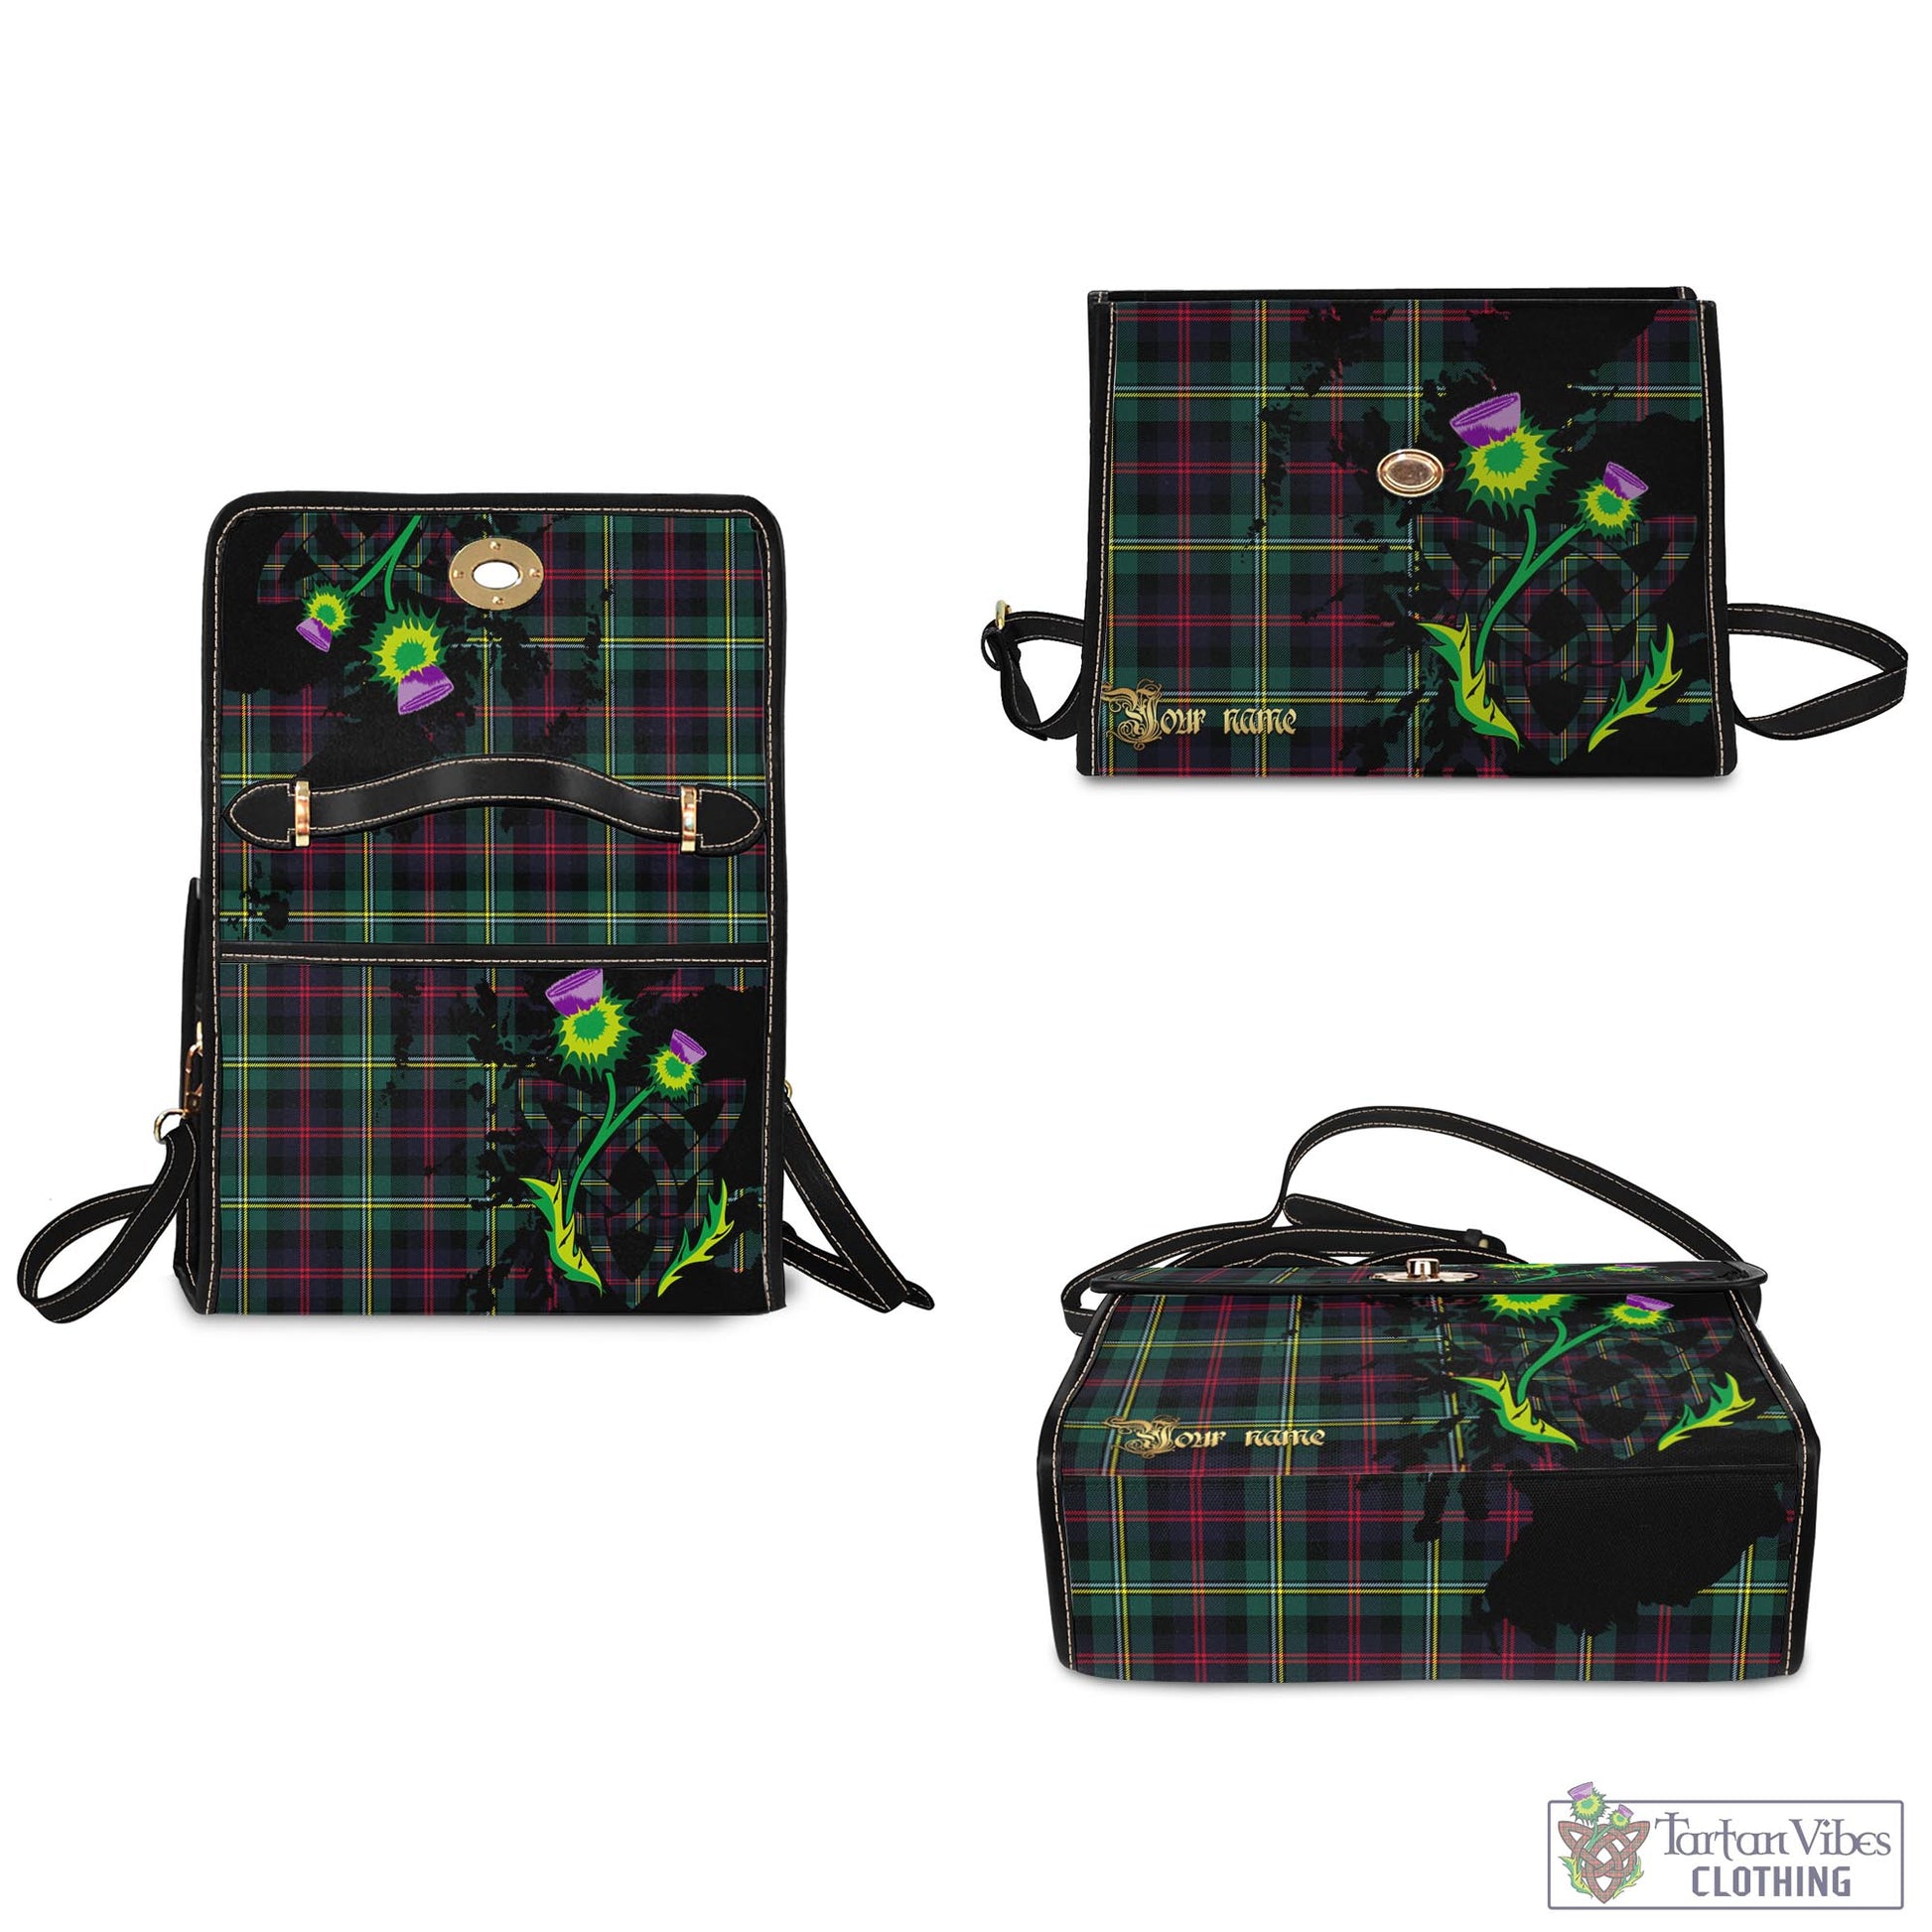 Tartan Vibes Clothing Malcolm Modern Tartan Waterproof Canvas Bag with Scotland Map and Thistle Celtic Accents